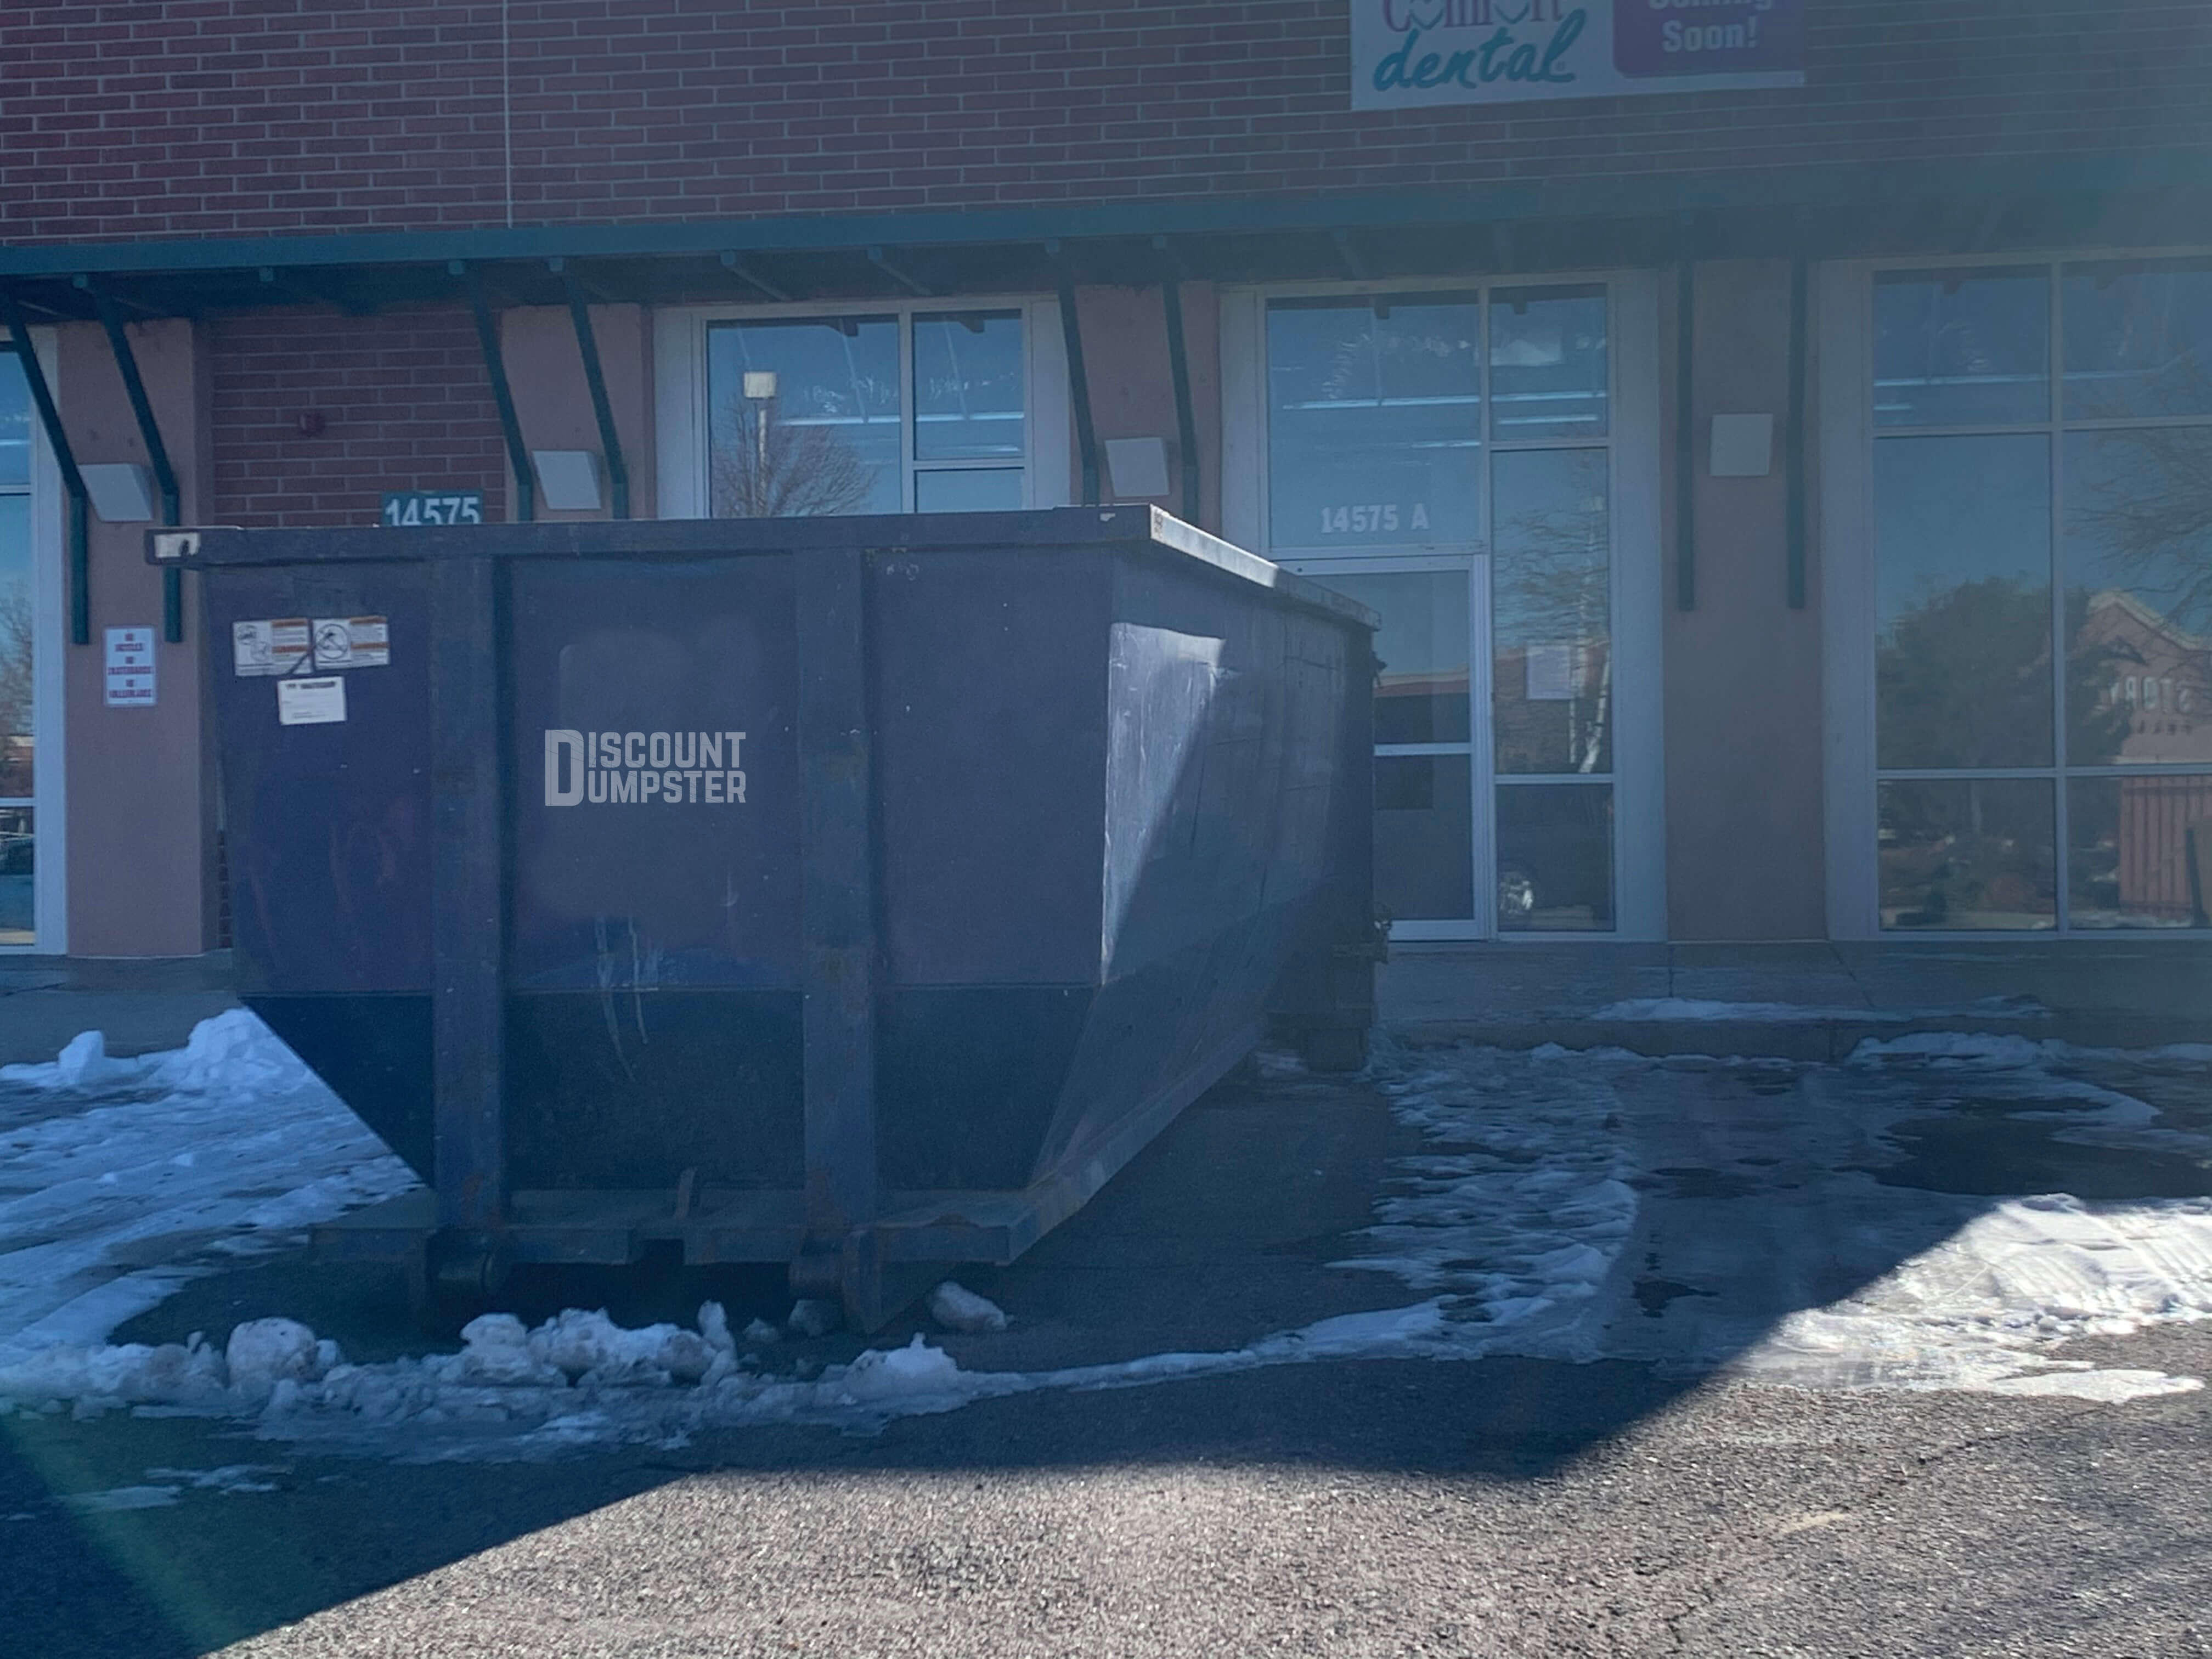 Discount dumpster can help with commercial waste removal in chicago il Discount Dumpster Chicago (312)549-9198